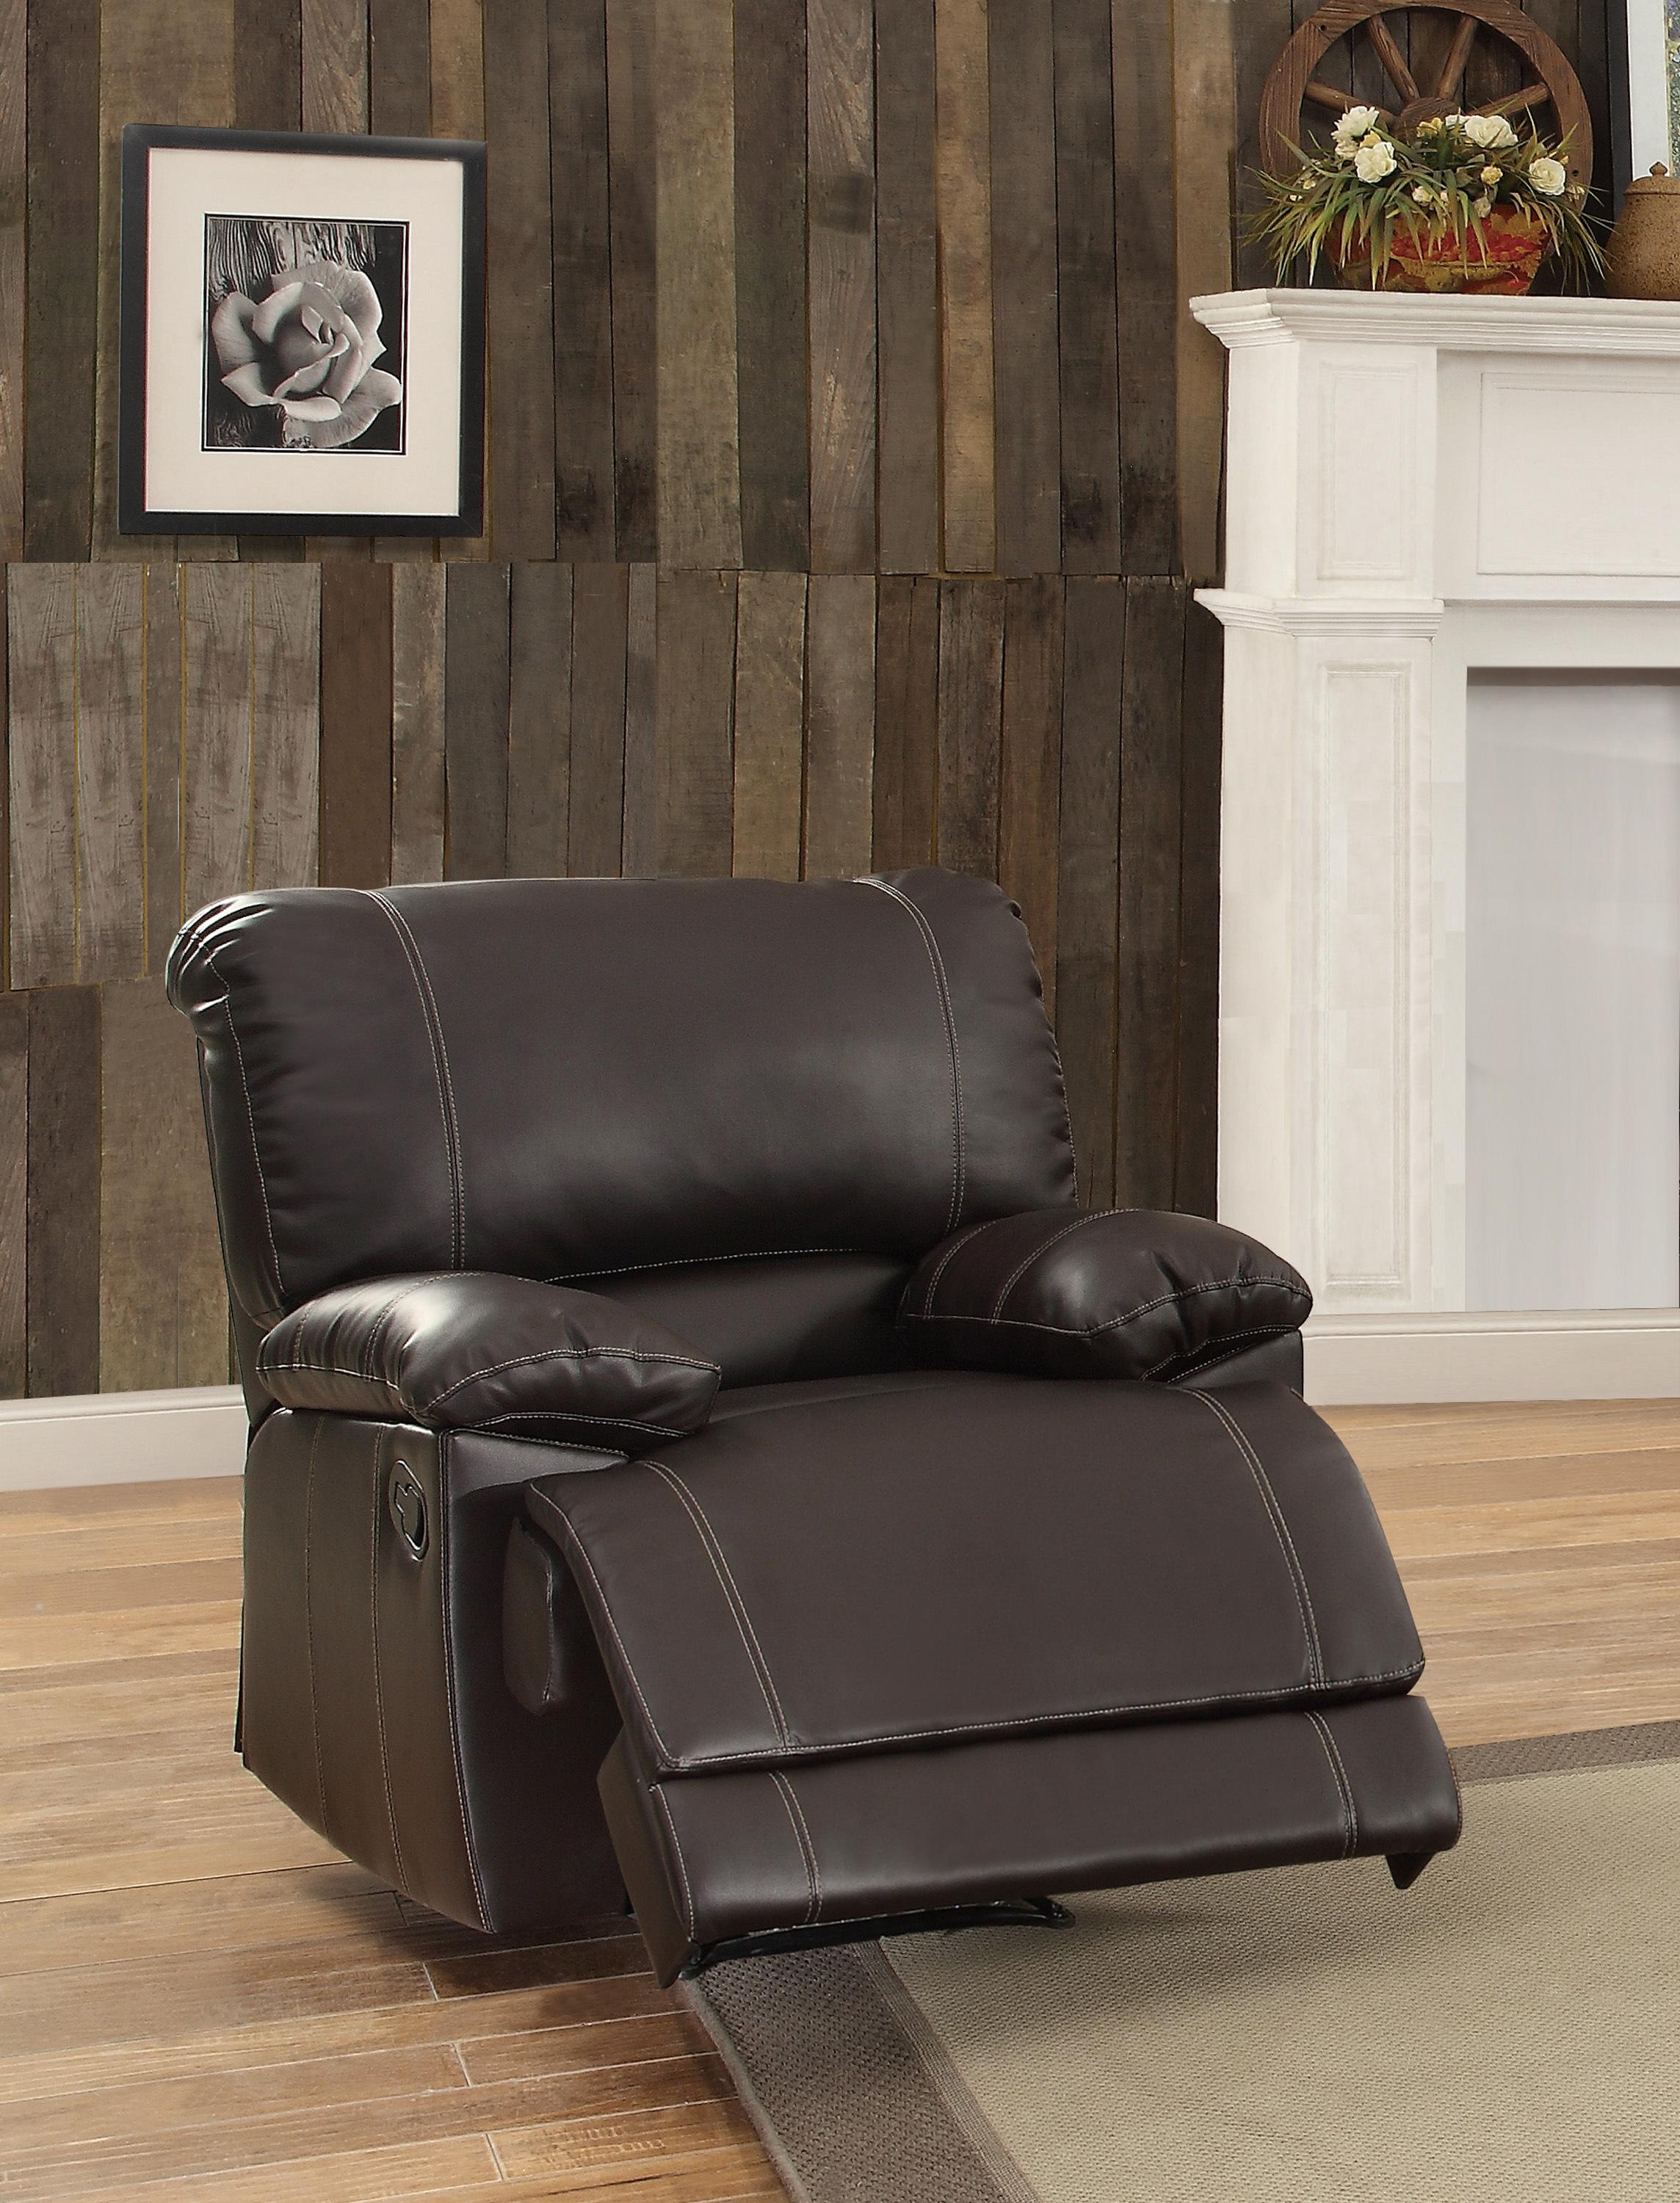 

        
Homelegance Cassville Chair 8403-1-C Reclining Chair Brown Faux Leather 64231625337266
